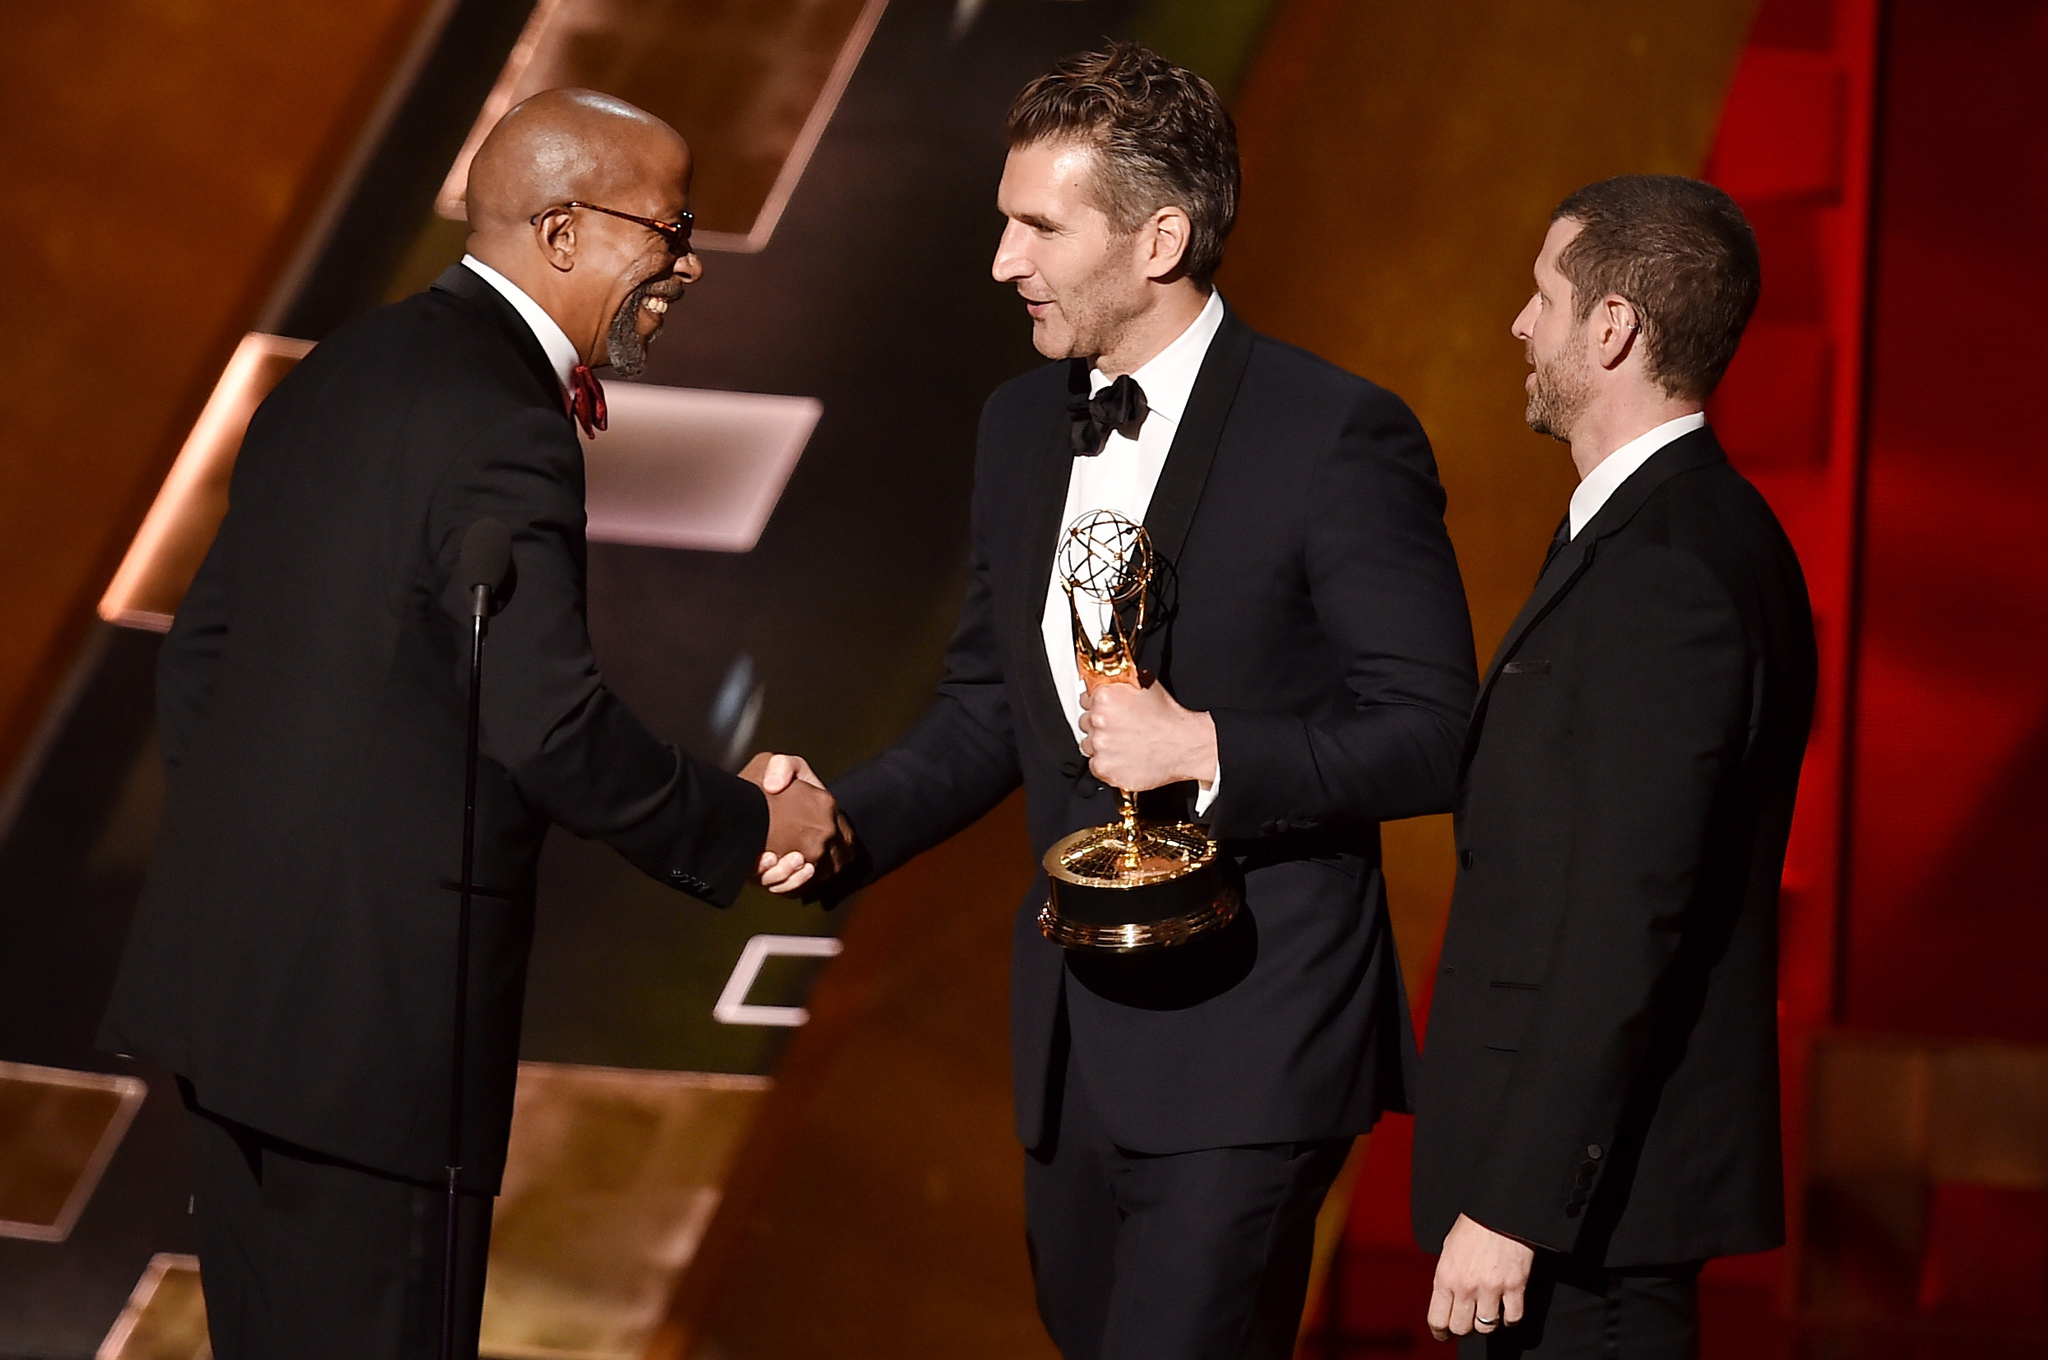 David Benioff and D.B. Weiss at event of The 67th Primetime Emmy Awards (2015)